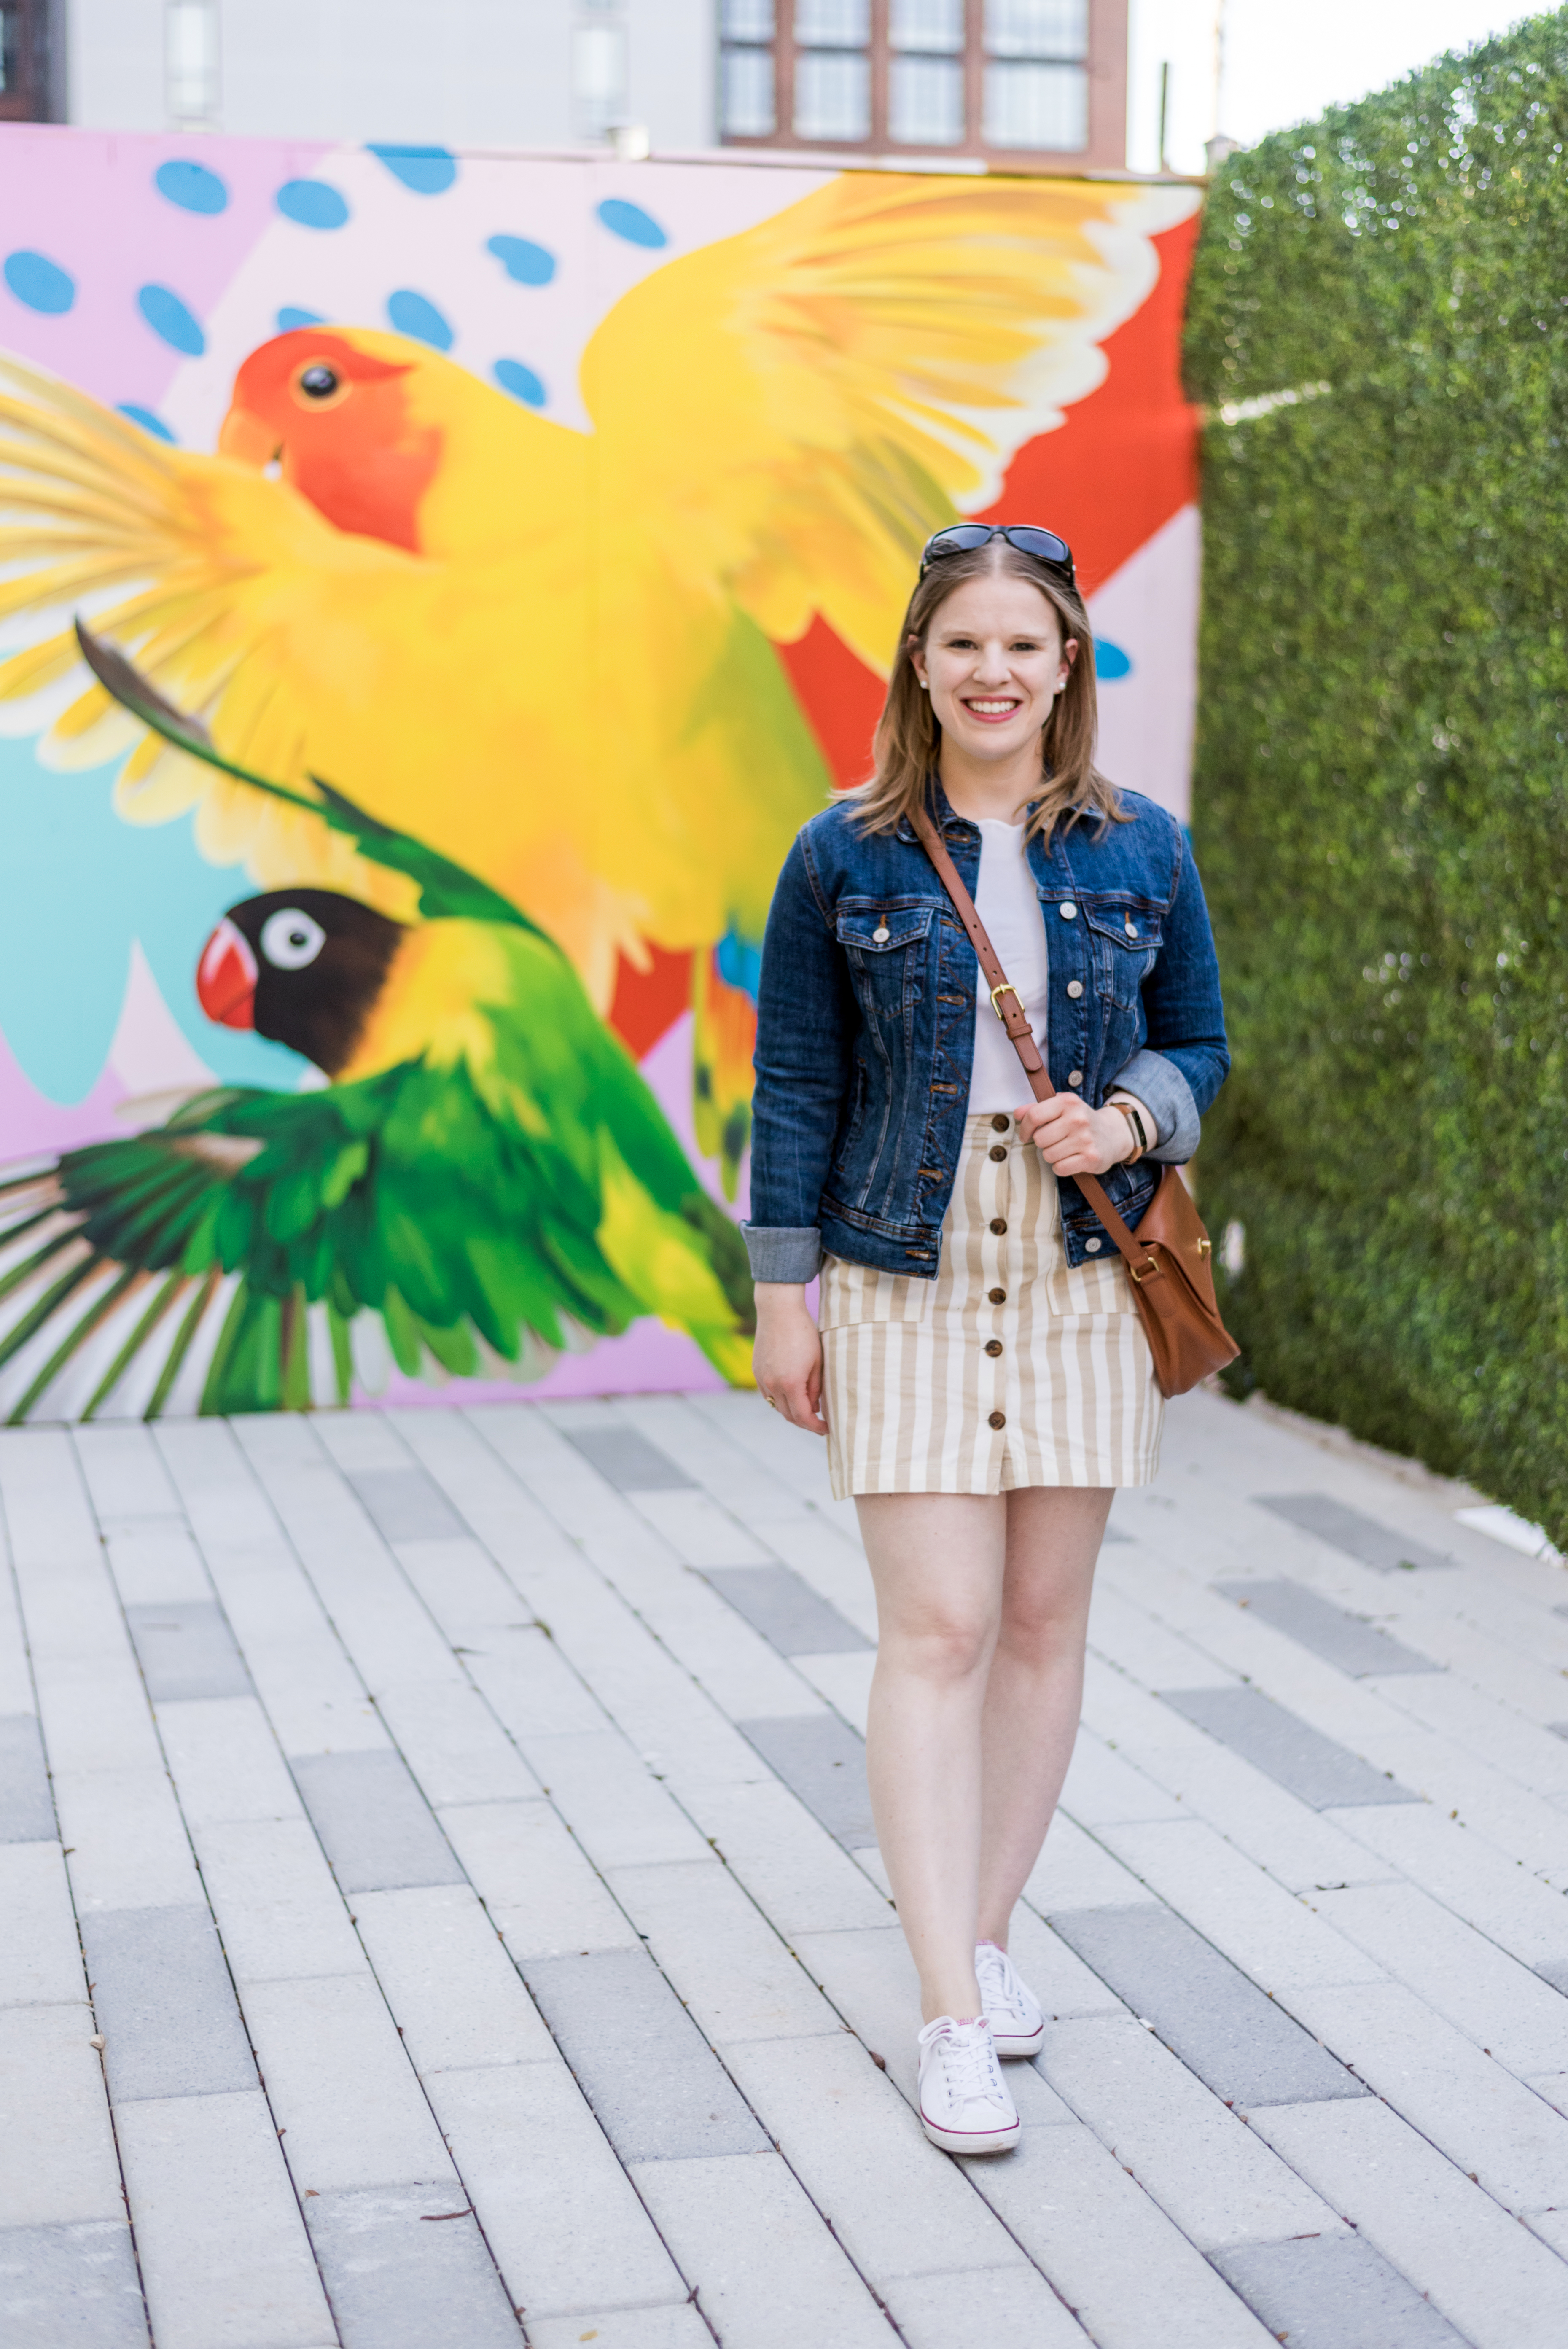 Denim Jacket Outfit Ideas That Feel Refreshingly Fun & Easy To Wear